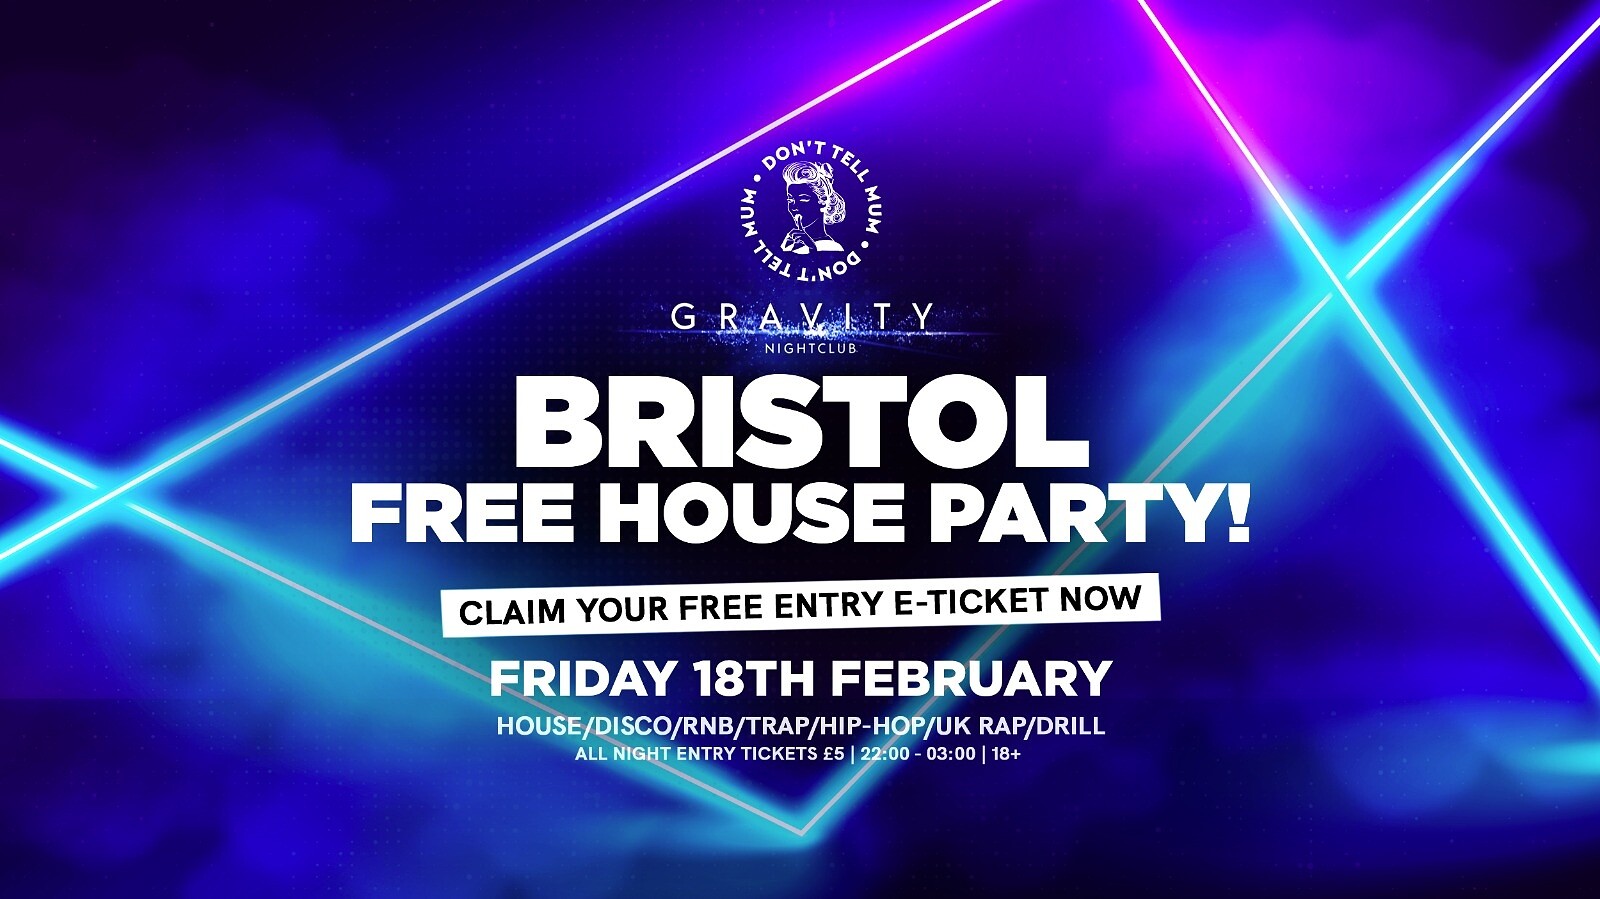 Don't Tell Mum Bristol • FREE HOUSE PARTY at Gravity